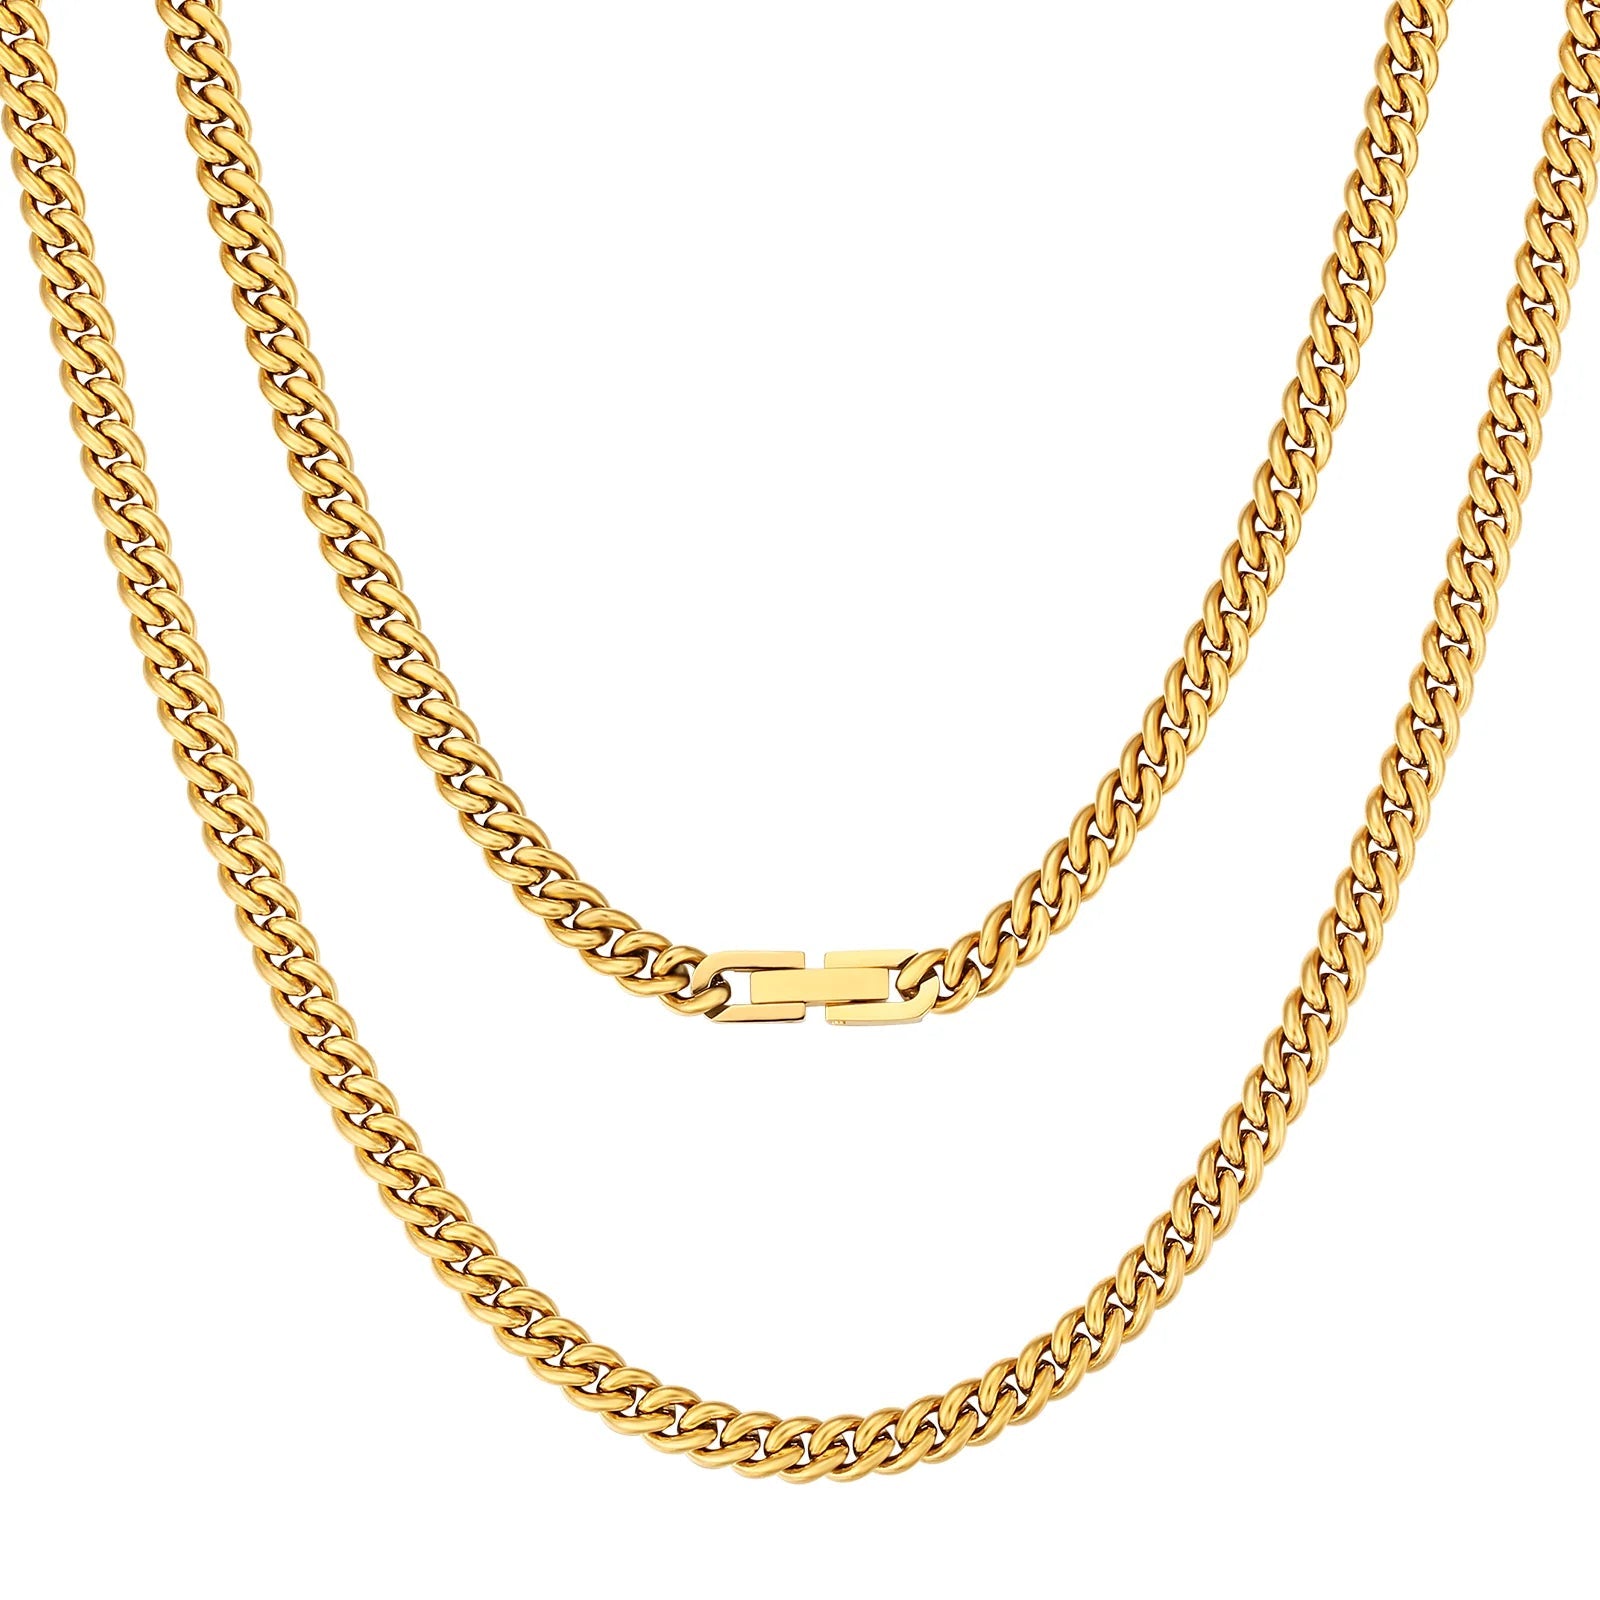 5mm Miami Cuban Link Chain in 18K Gold Necklaces 